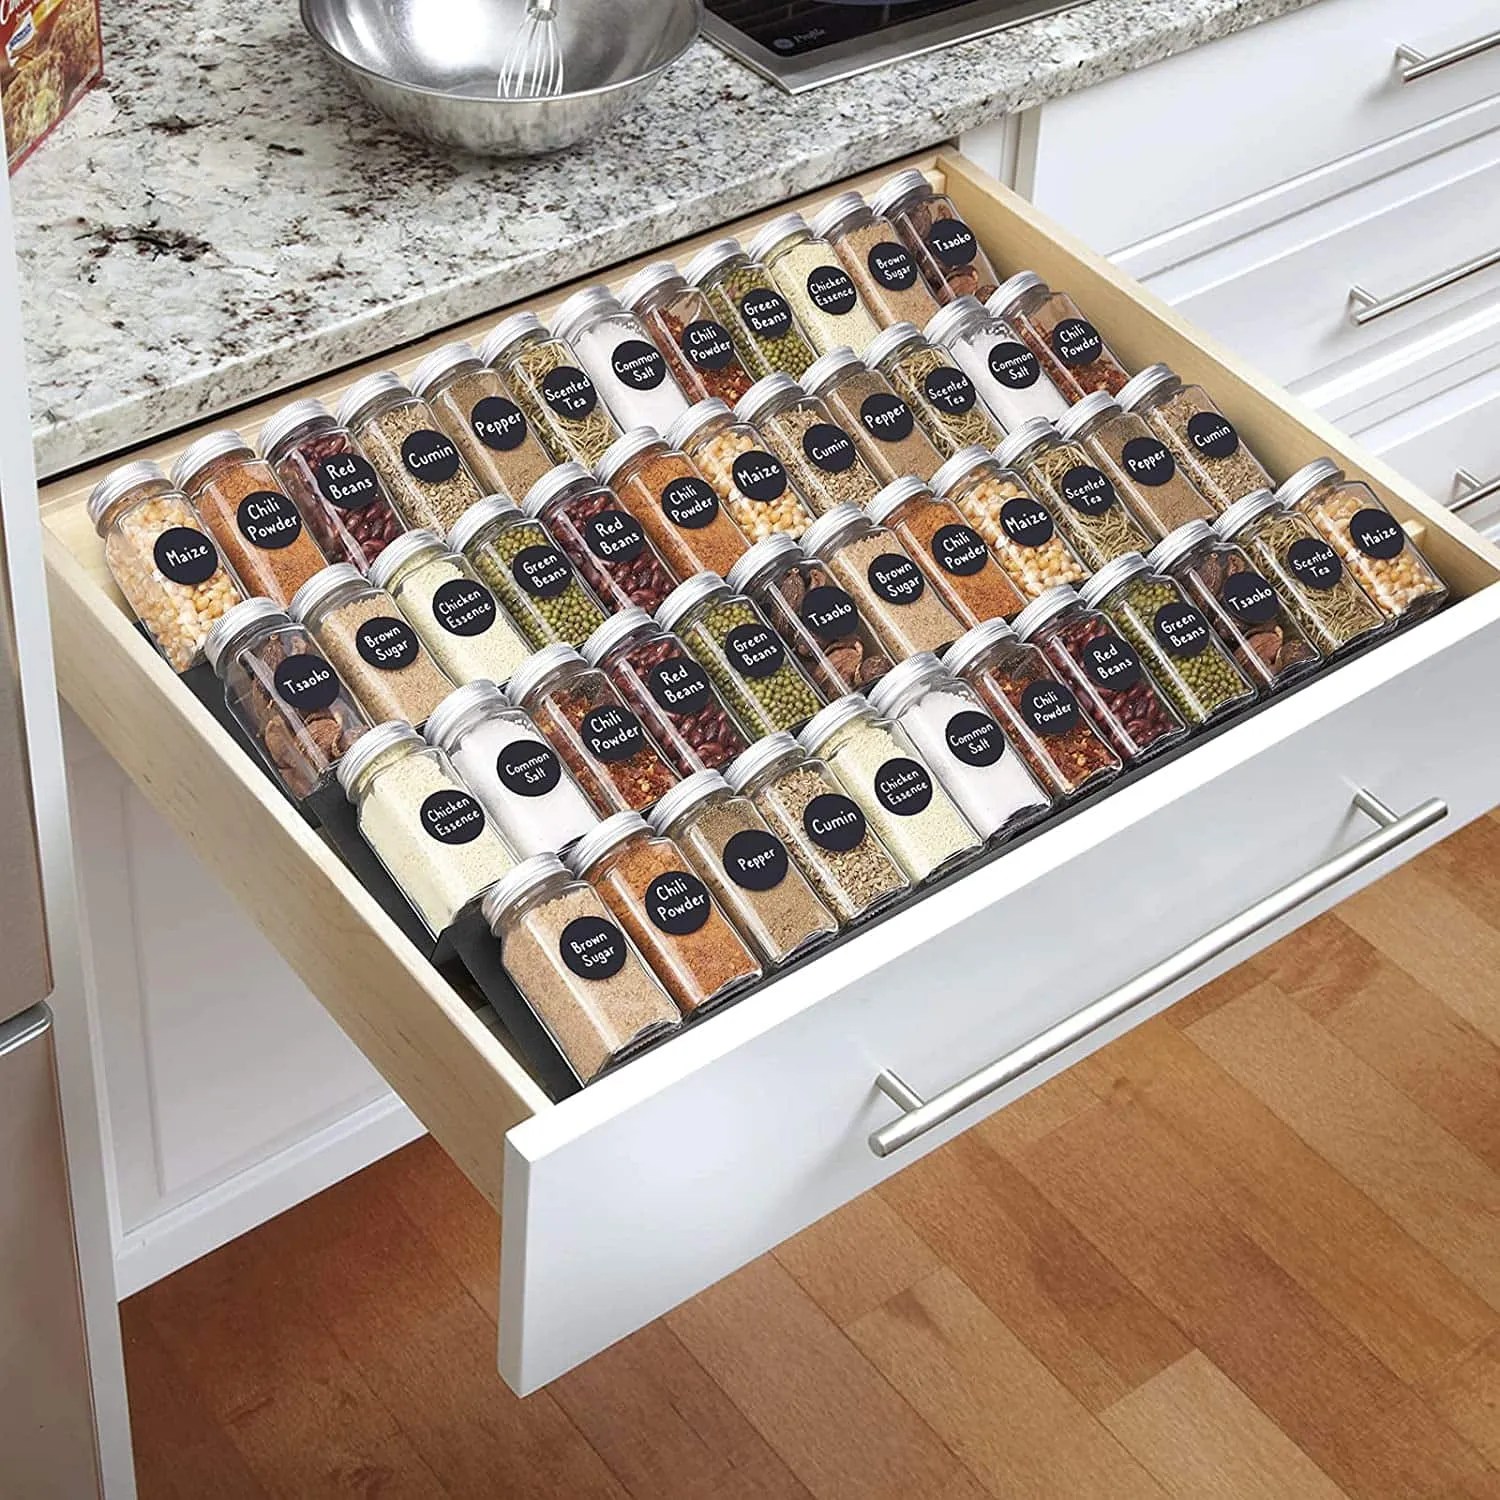 10 of the Best Drawer Spice Racks to Help Organize your Kitchen